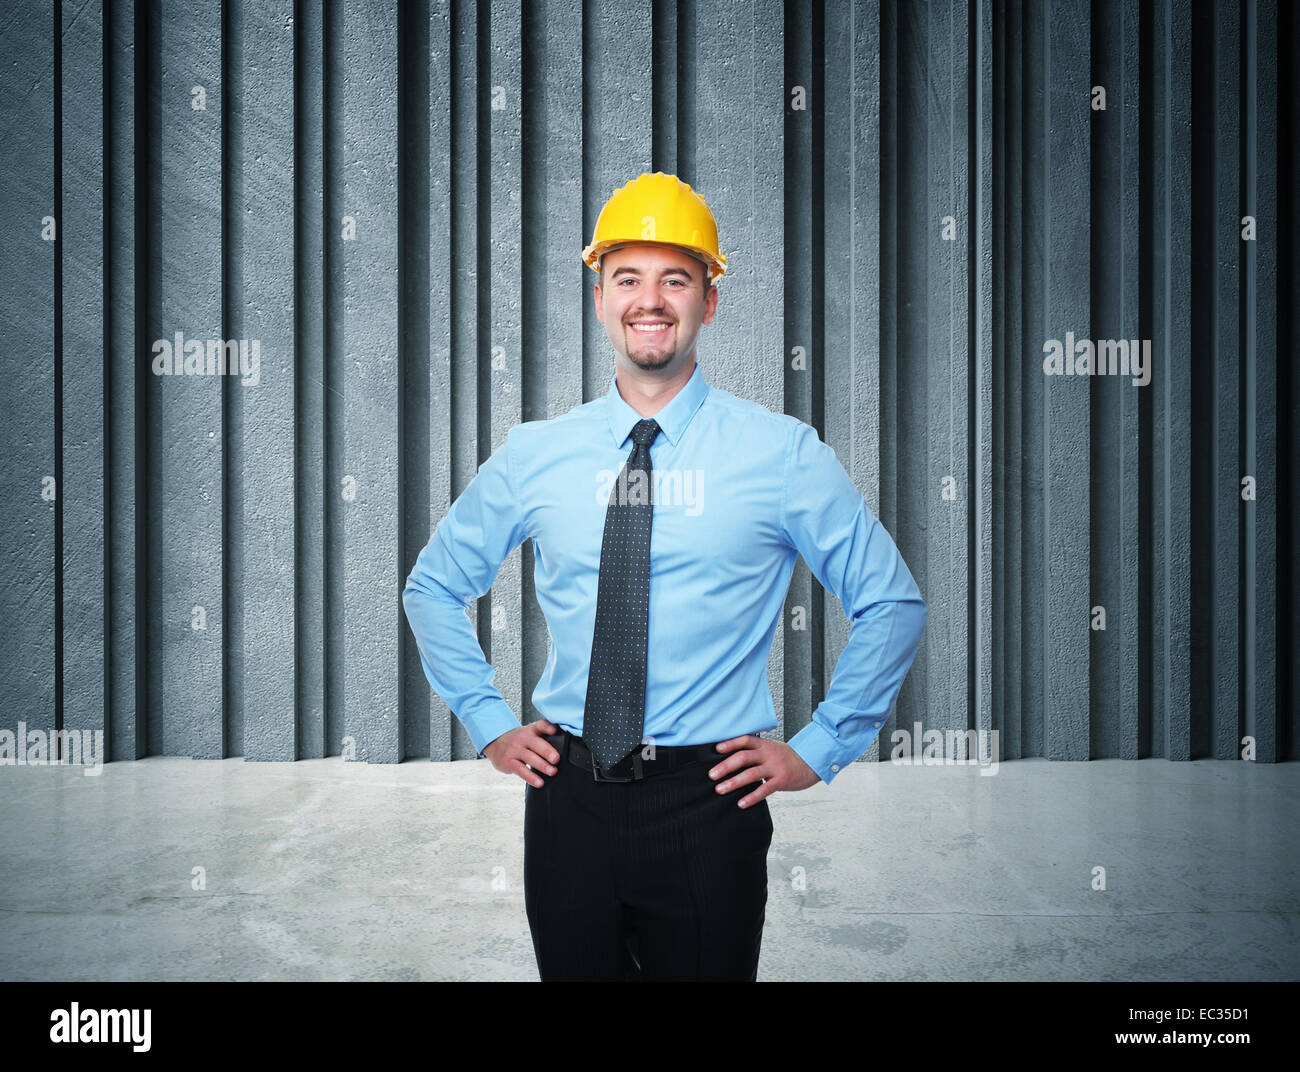 smiling worker and concrete background Stock Photo